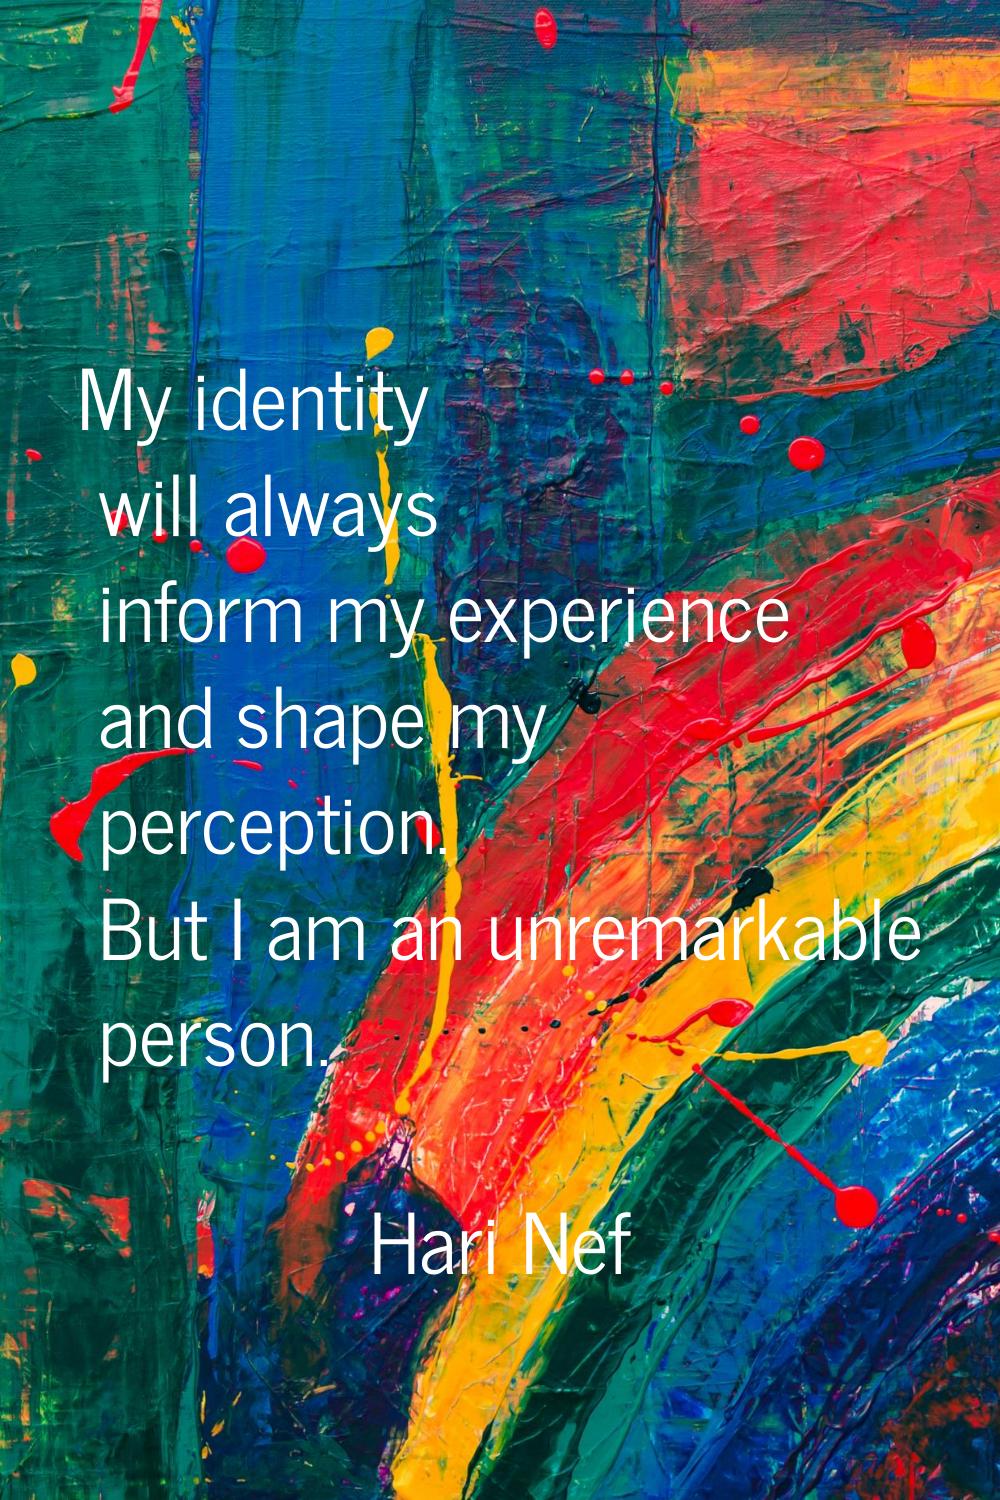 My identity will always inform my experience and shape my perception. But I am an unremarkable pers